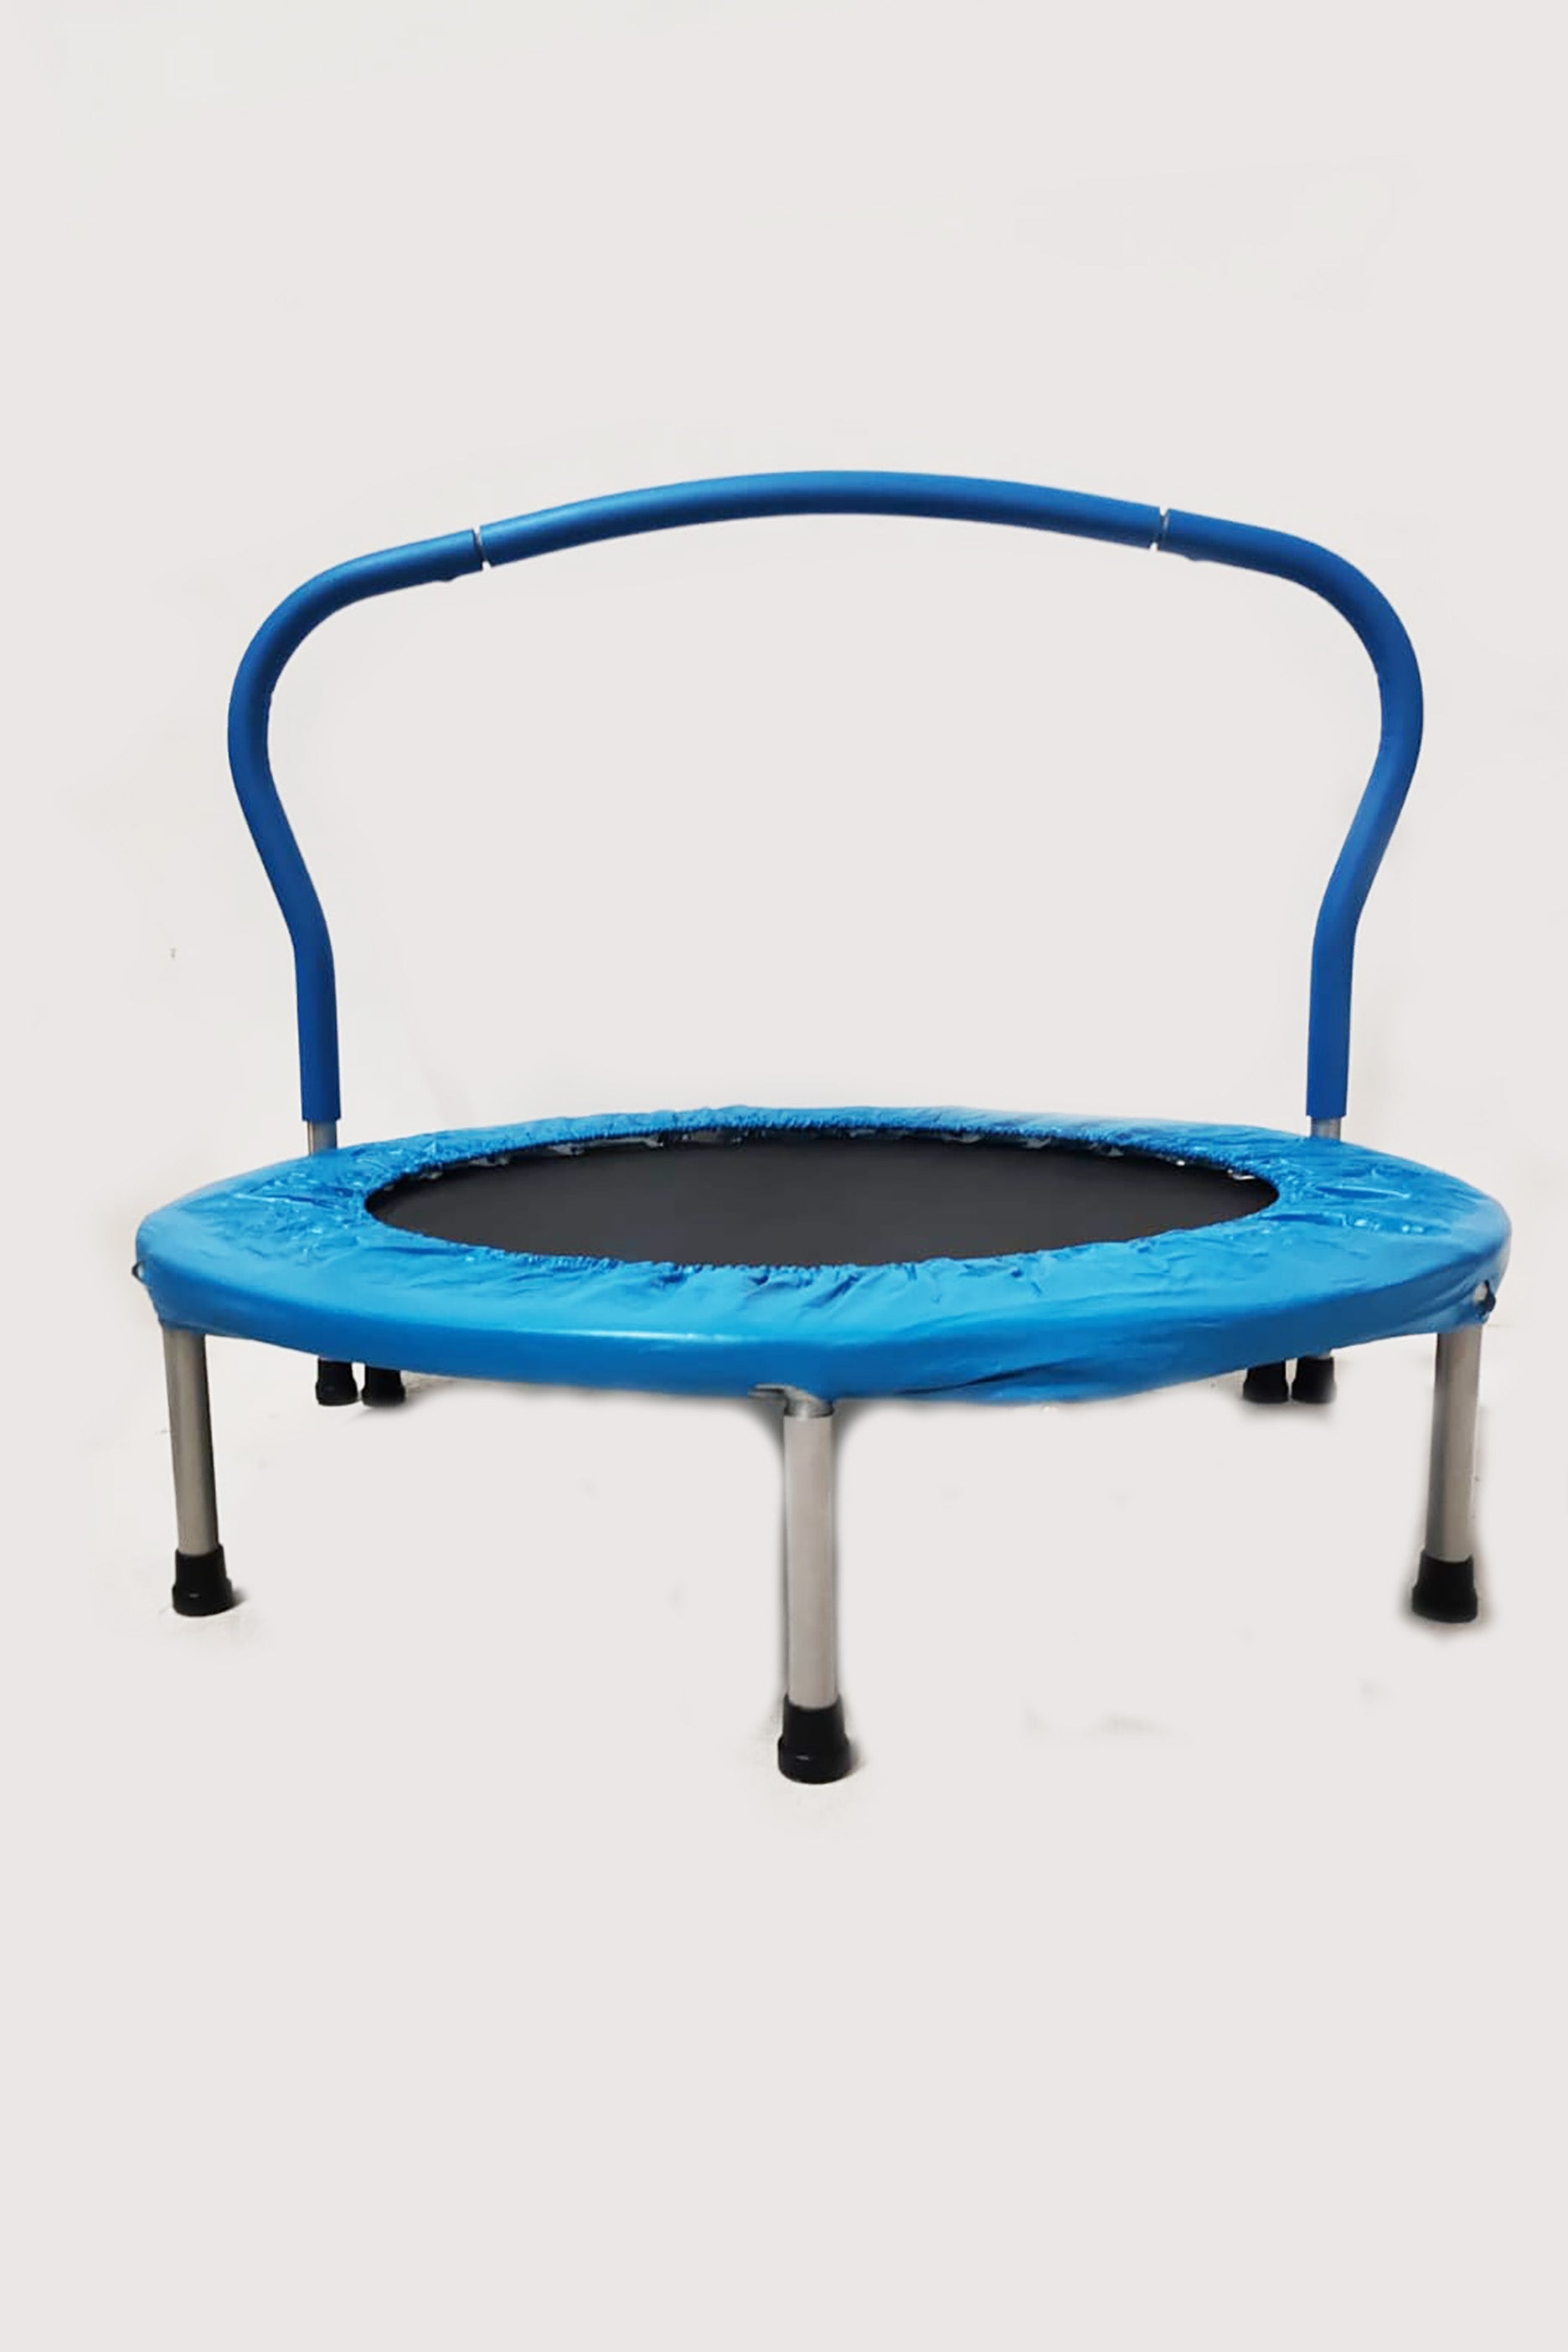 Portable Jumping Trampoline with Bar Holder